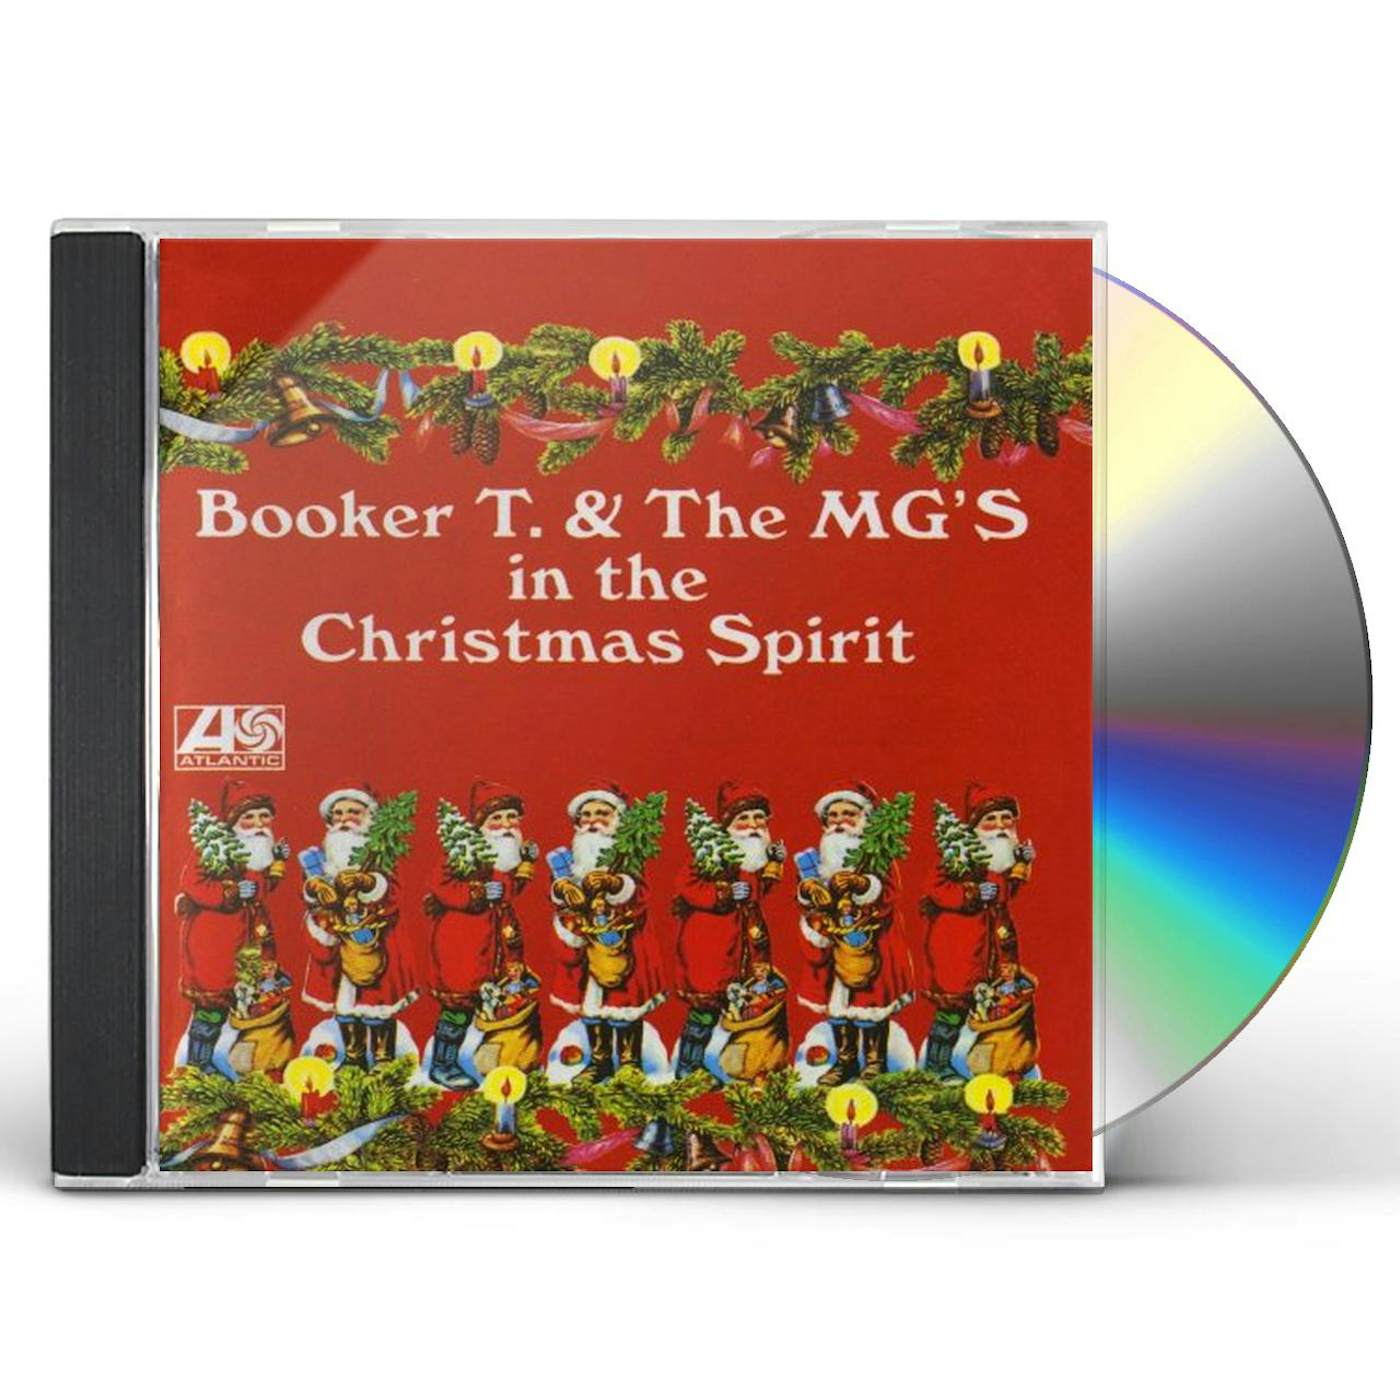 Booker T. & the M.G.'s IN THE CHRISTMAS SPIRIT CD